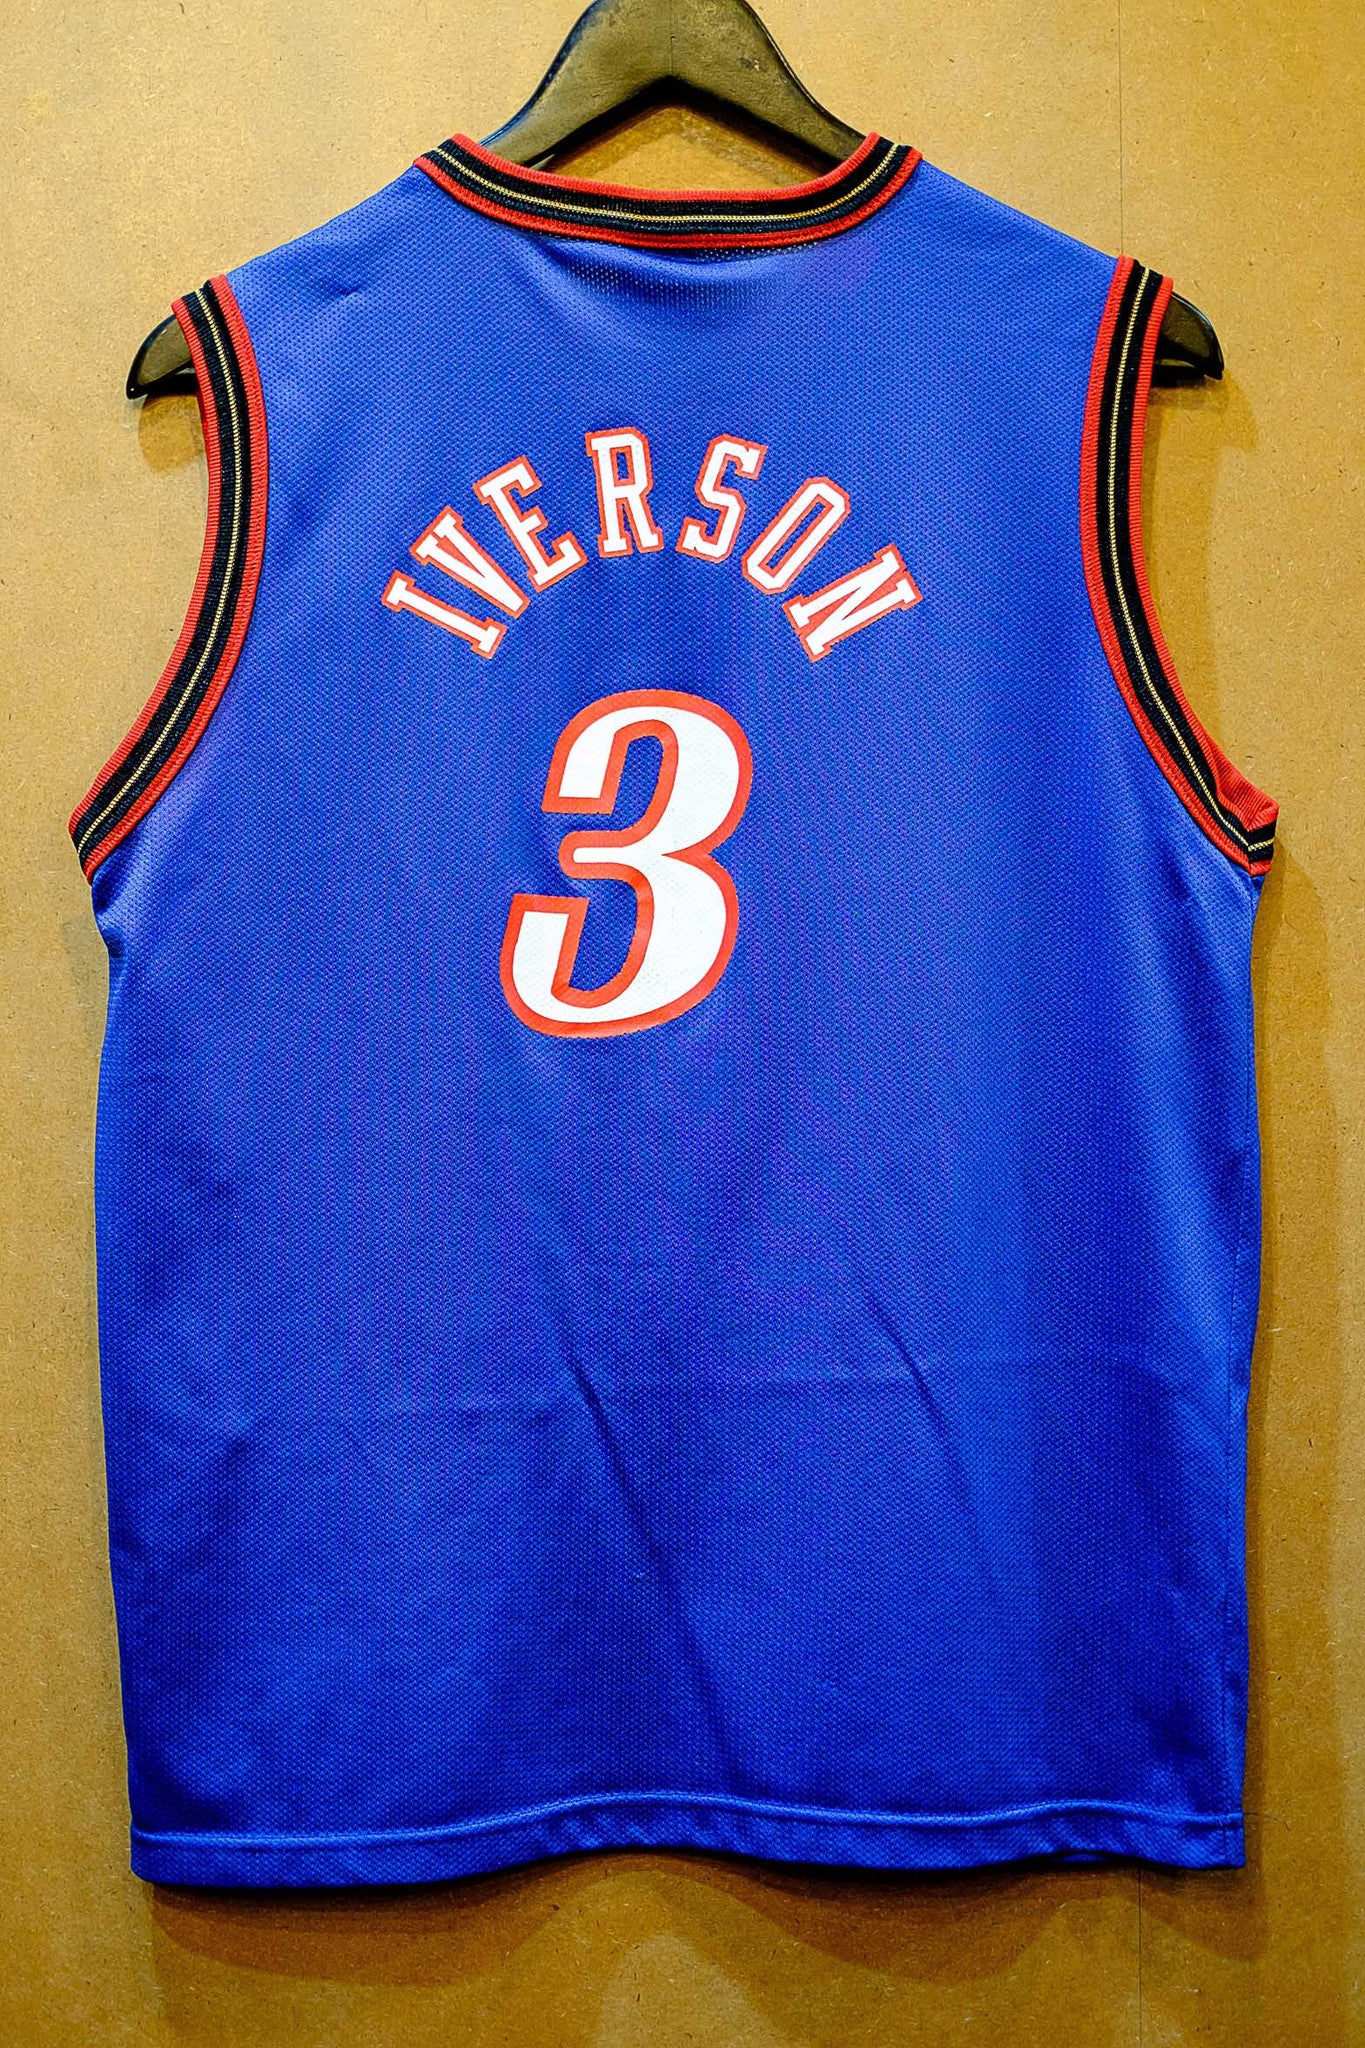 Vintage Champion Sixers Iverson Jersey 